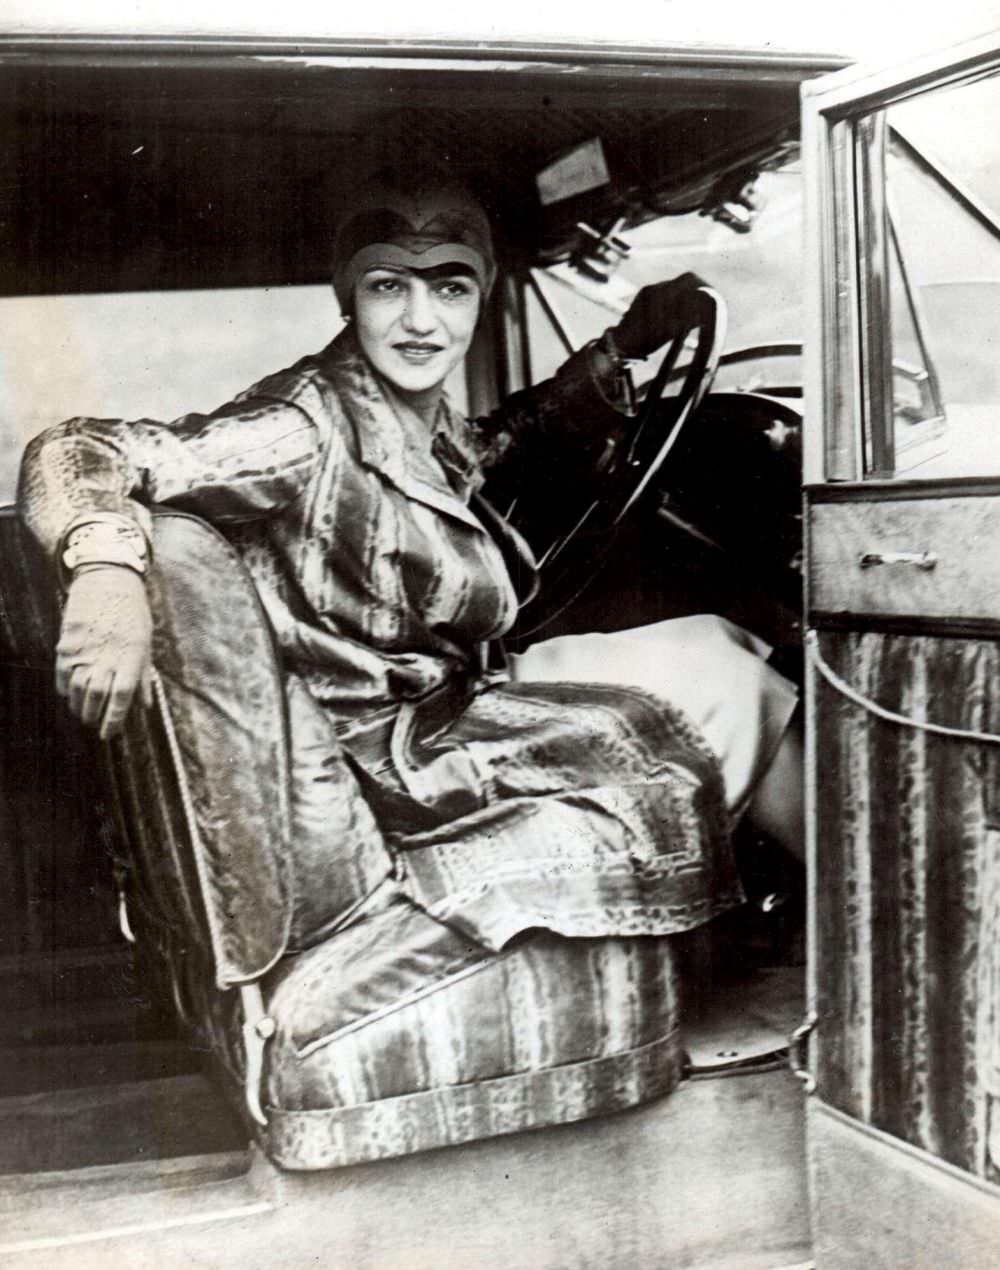 One woman can be seen wearing a snakeskin outfit coordinated with her car interior, 1927.